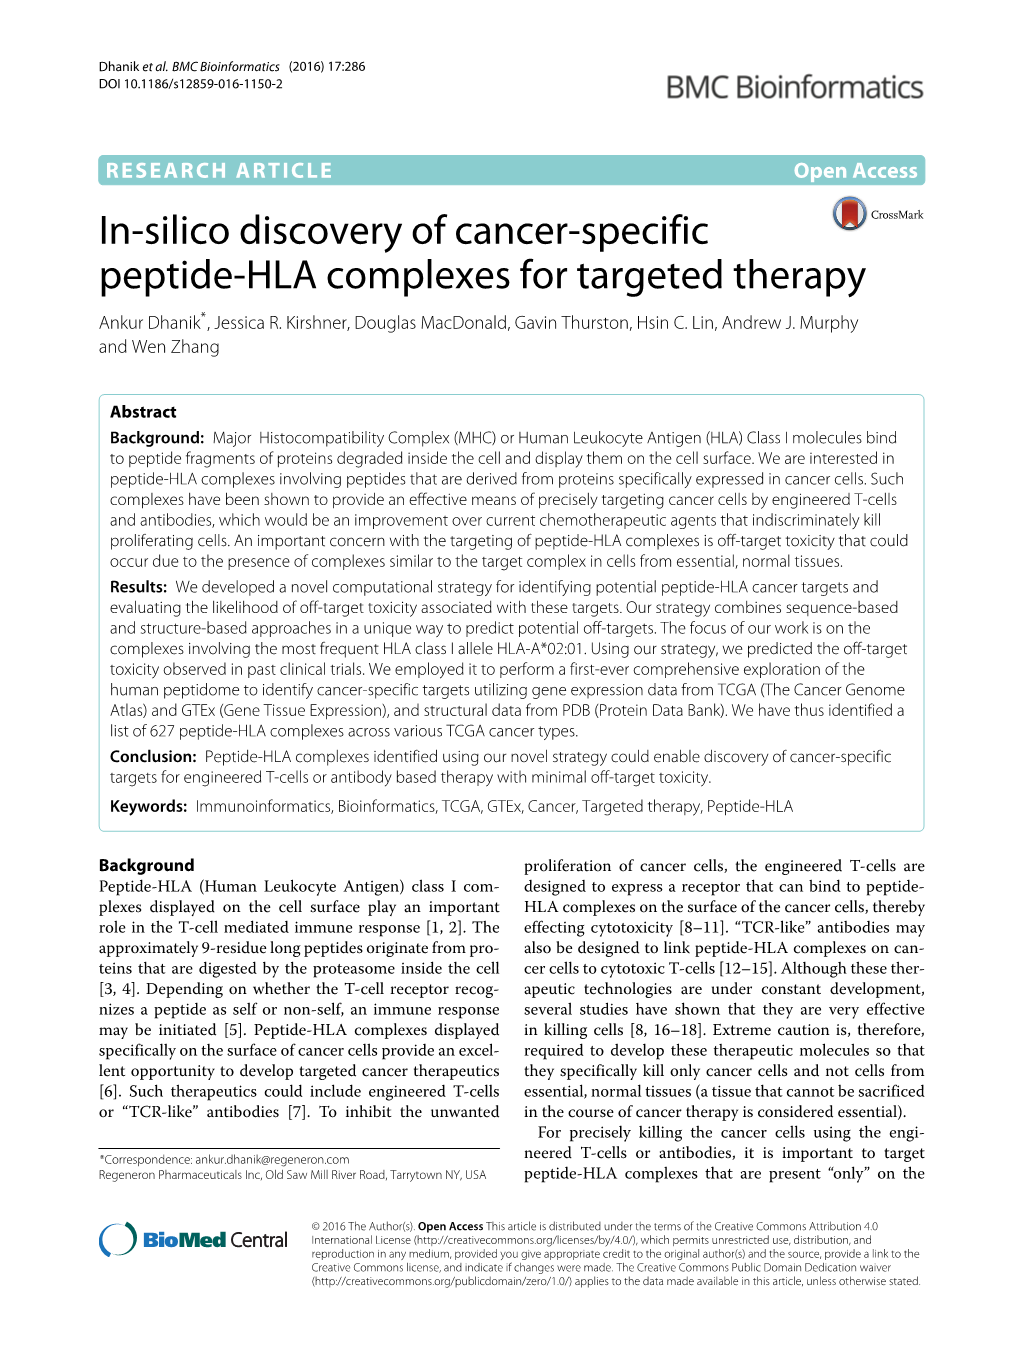 In-Silico Discovery of Cancer-Specific Peptide-HLA Complexes for Targeted Therapy Ankur Dhanik*, Jessica R